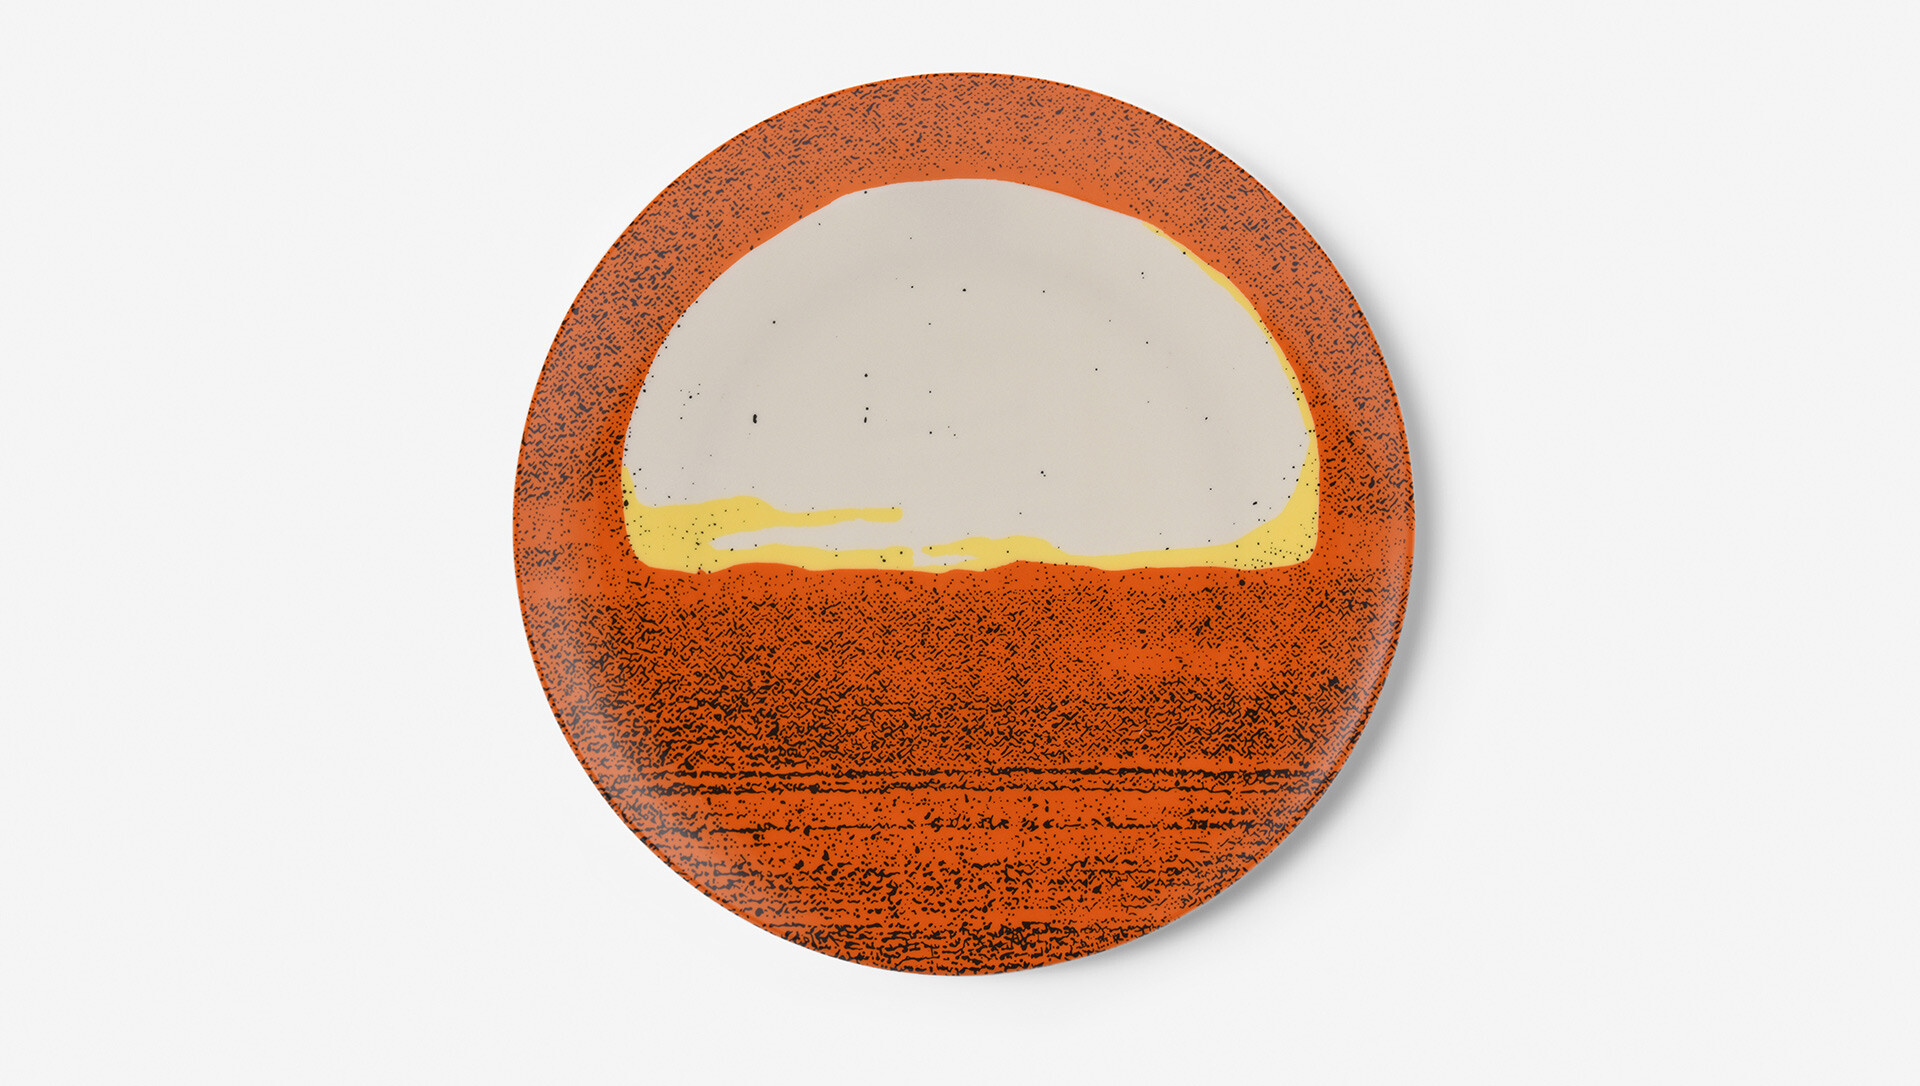 A limited edition plate by Nate Lowman, titled Blaze of Glory (Pantone Variation), dated 2012/2020.